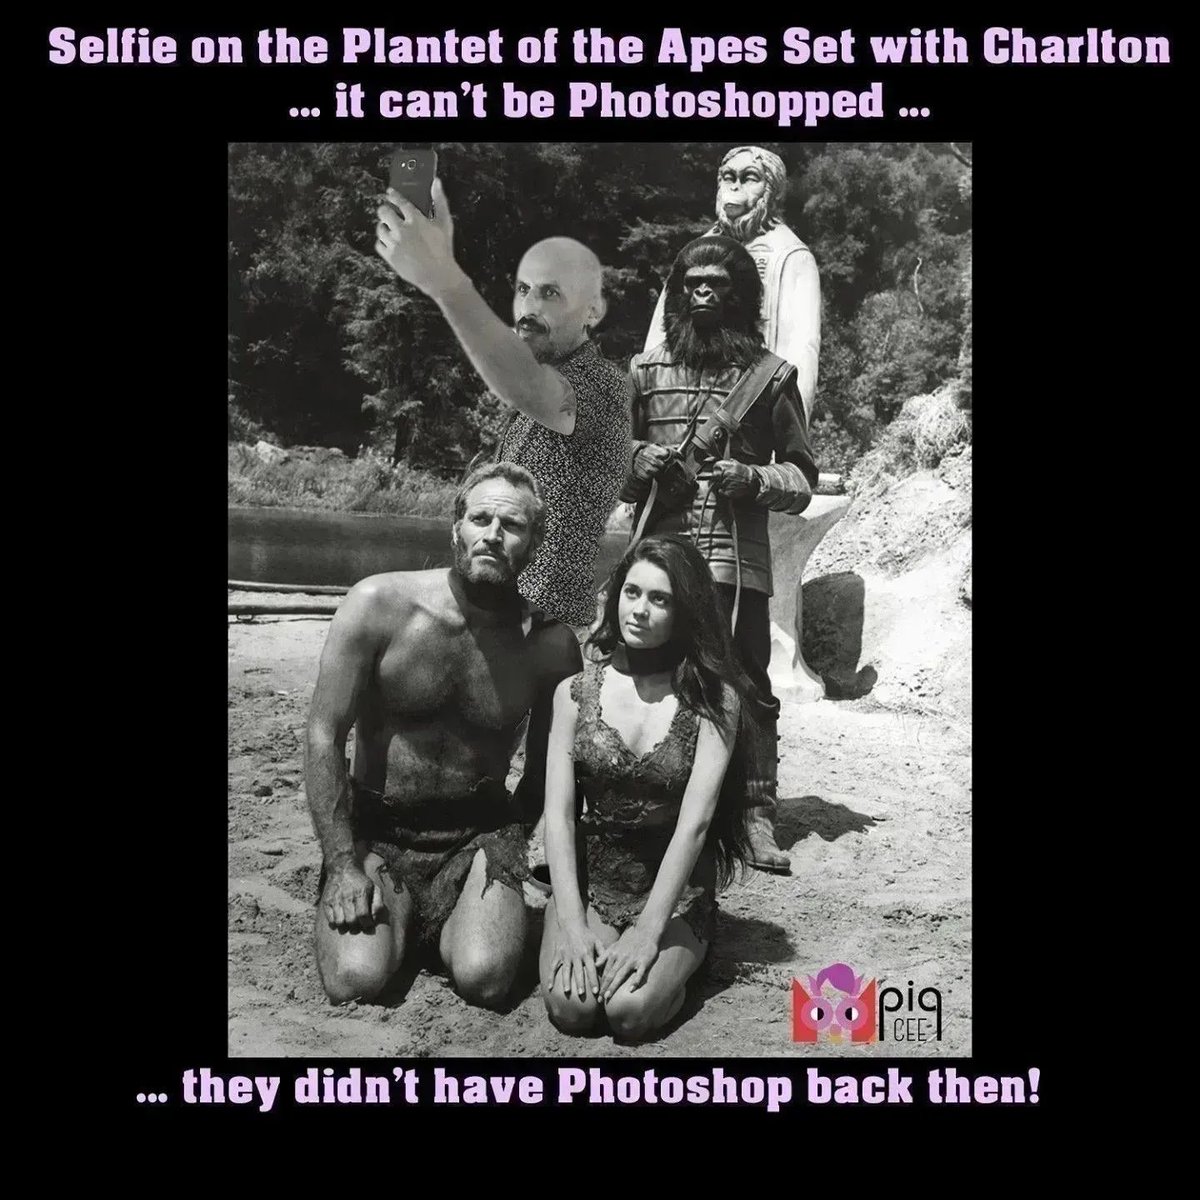 Selfie with Charlton! It can't be Photoshopped - they didn't have Photoshop back then 🤣 Personalised photo gifts
@piqCEE
buff.ly/3jTJPSc 
#personalgift #uniquegifts #gifts #printed #personalisedgifts #wallart #decor #holidaygifts #interiordesign #MHHSBD #Earlybiz